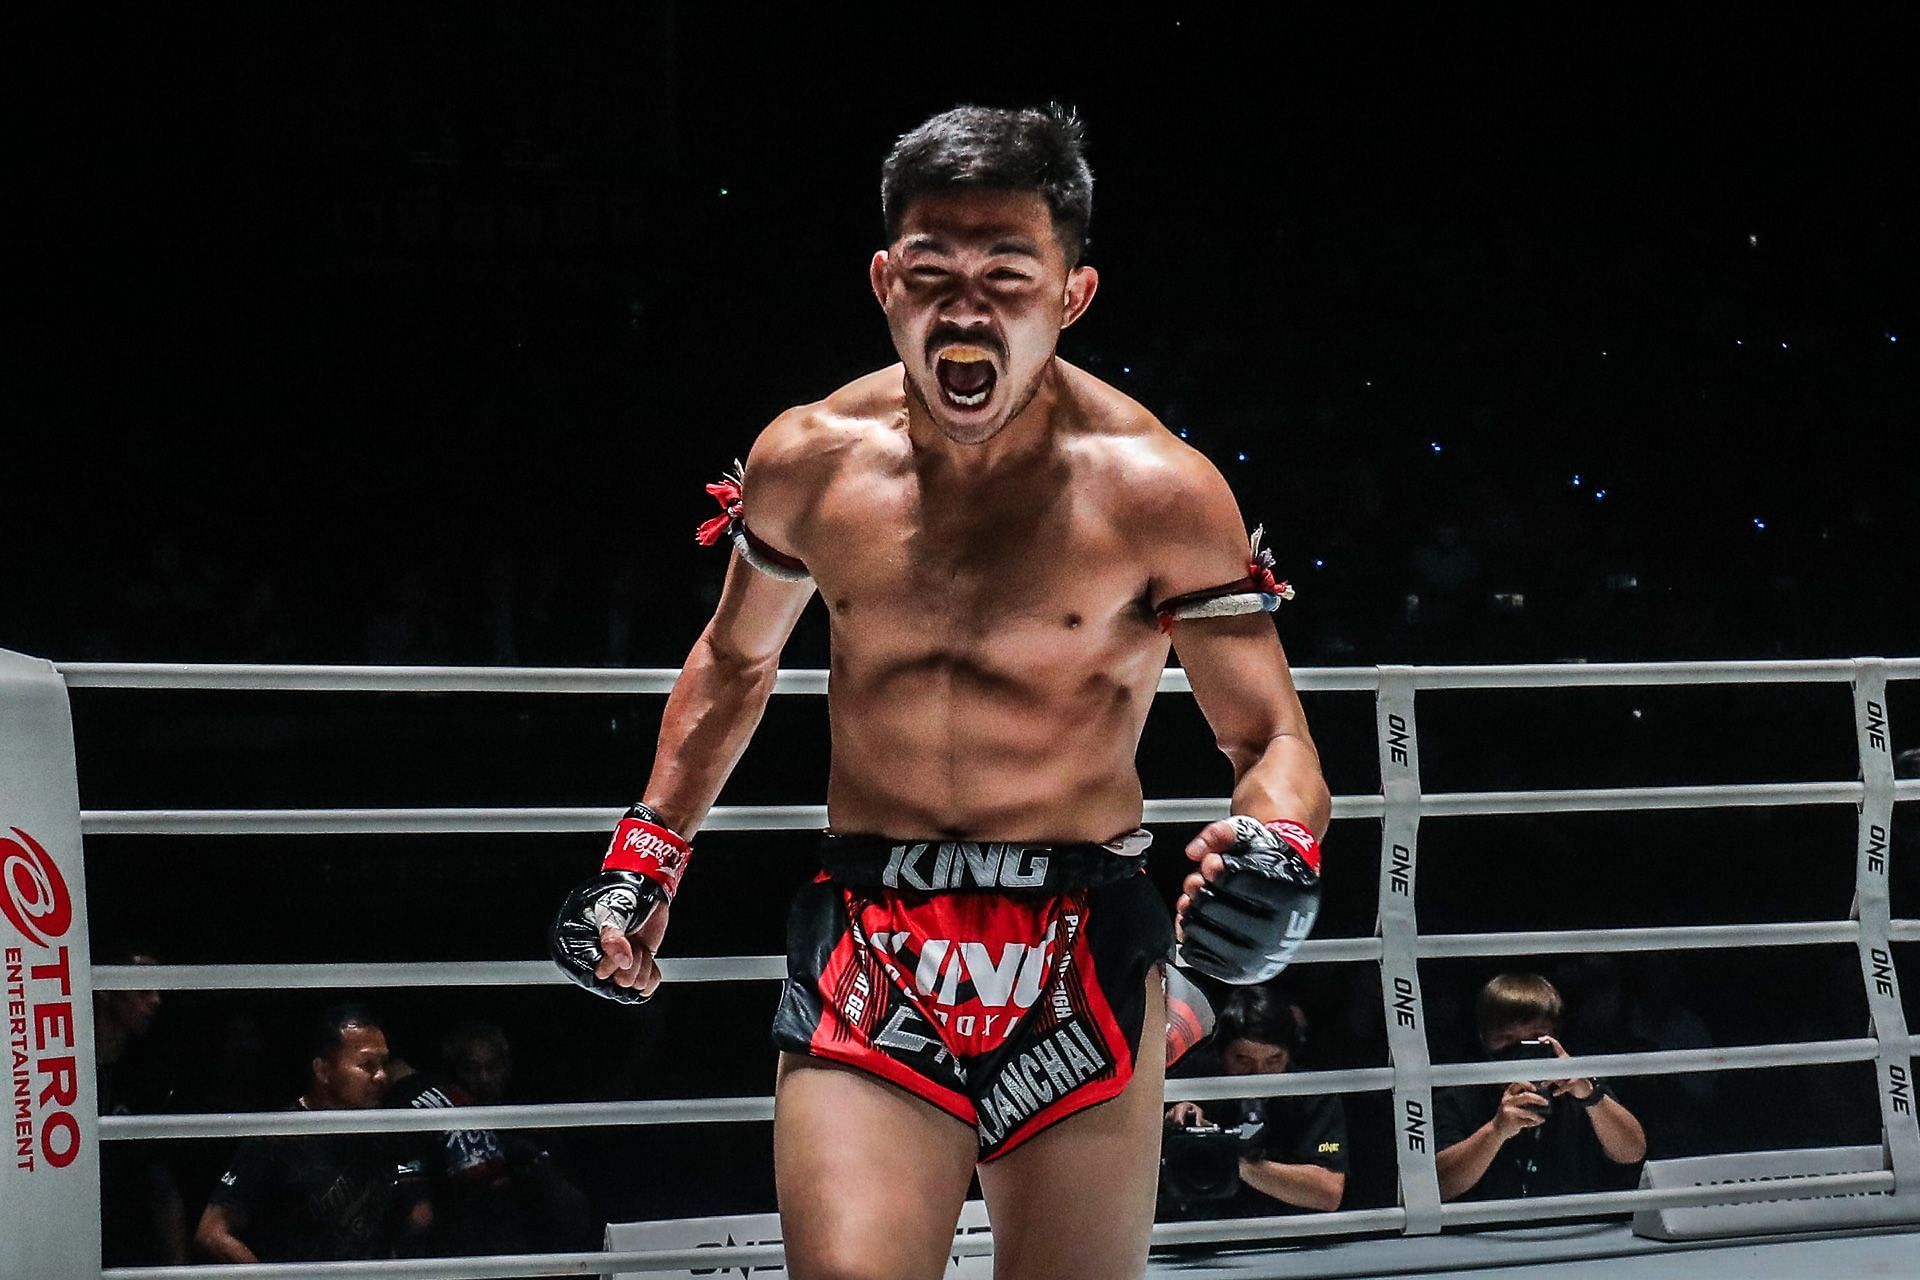 Prajanchai celebrates after unifying the ONE Championship strawweight Muay Thai titles by knocking out Joseph Lasiri.